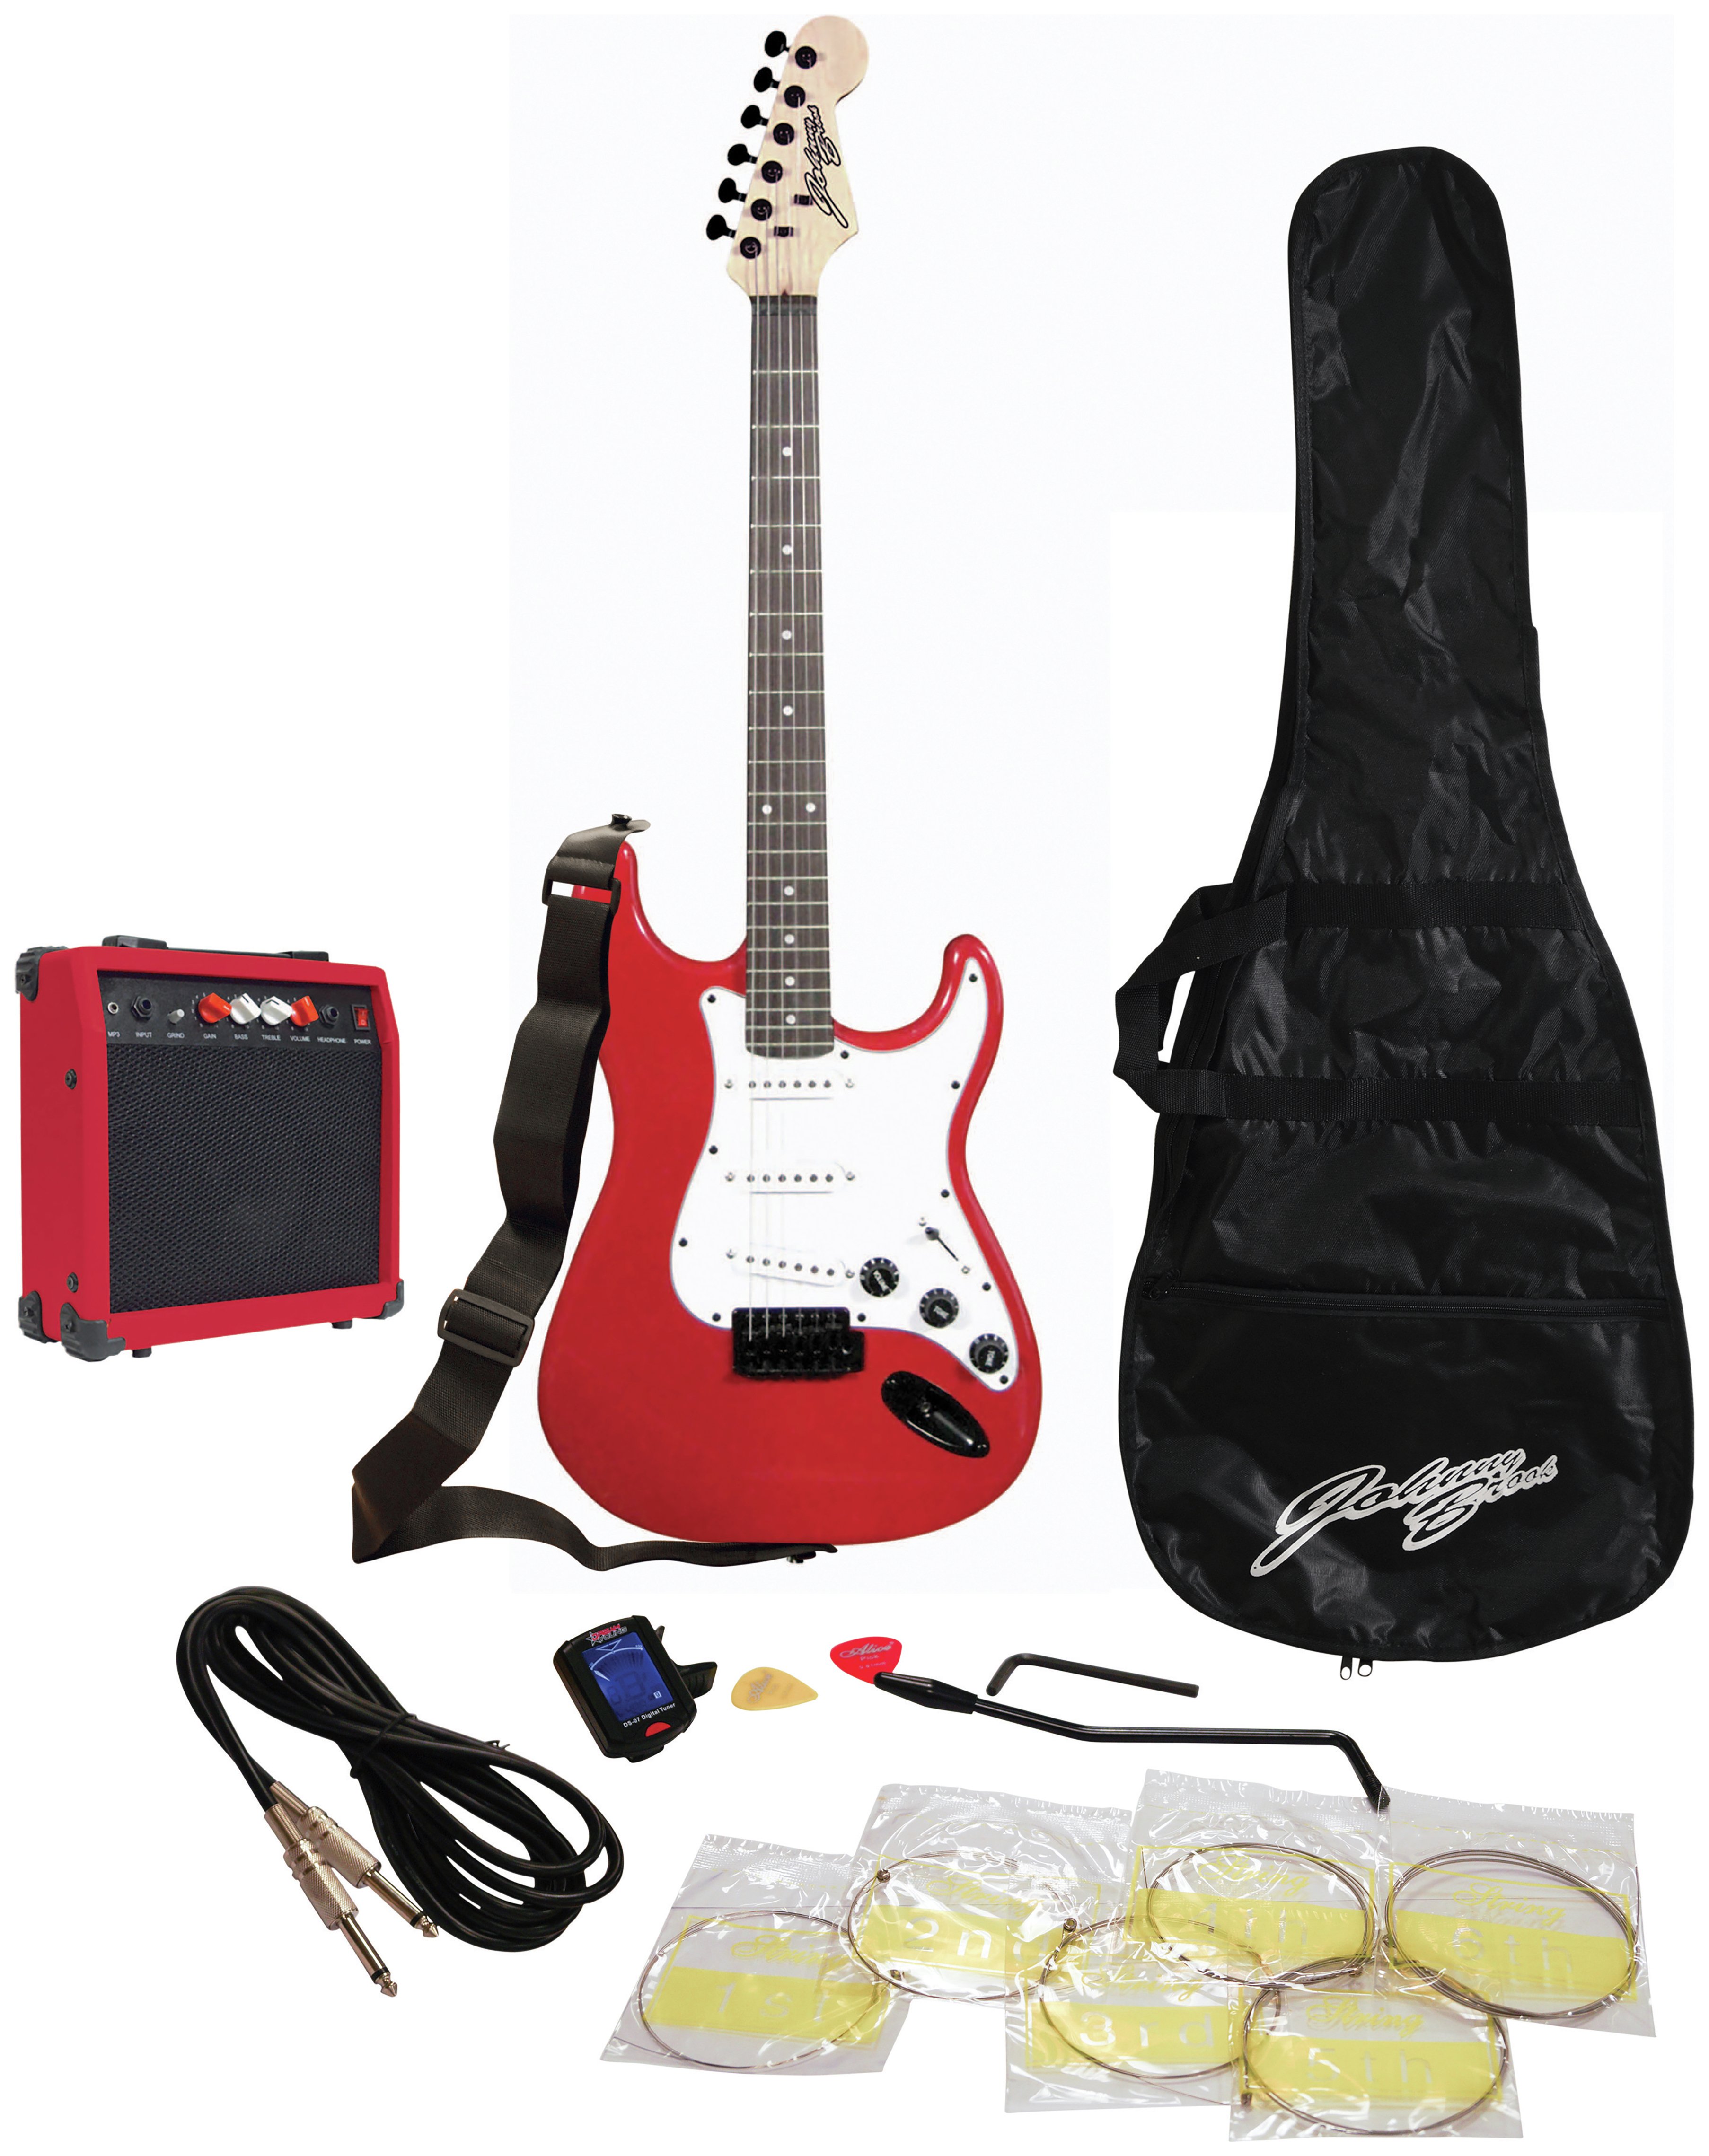 Johnny Brook Electric Guitar, Amp and Accessories - Red